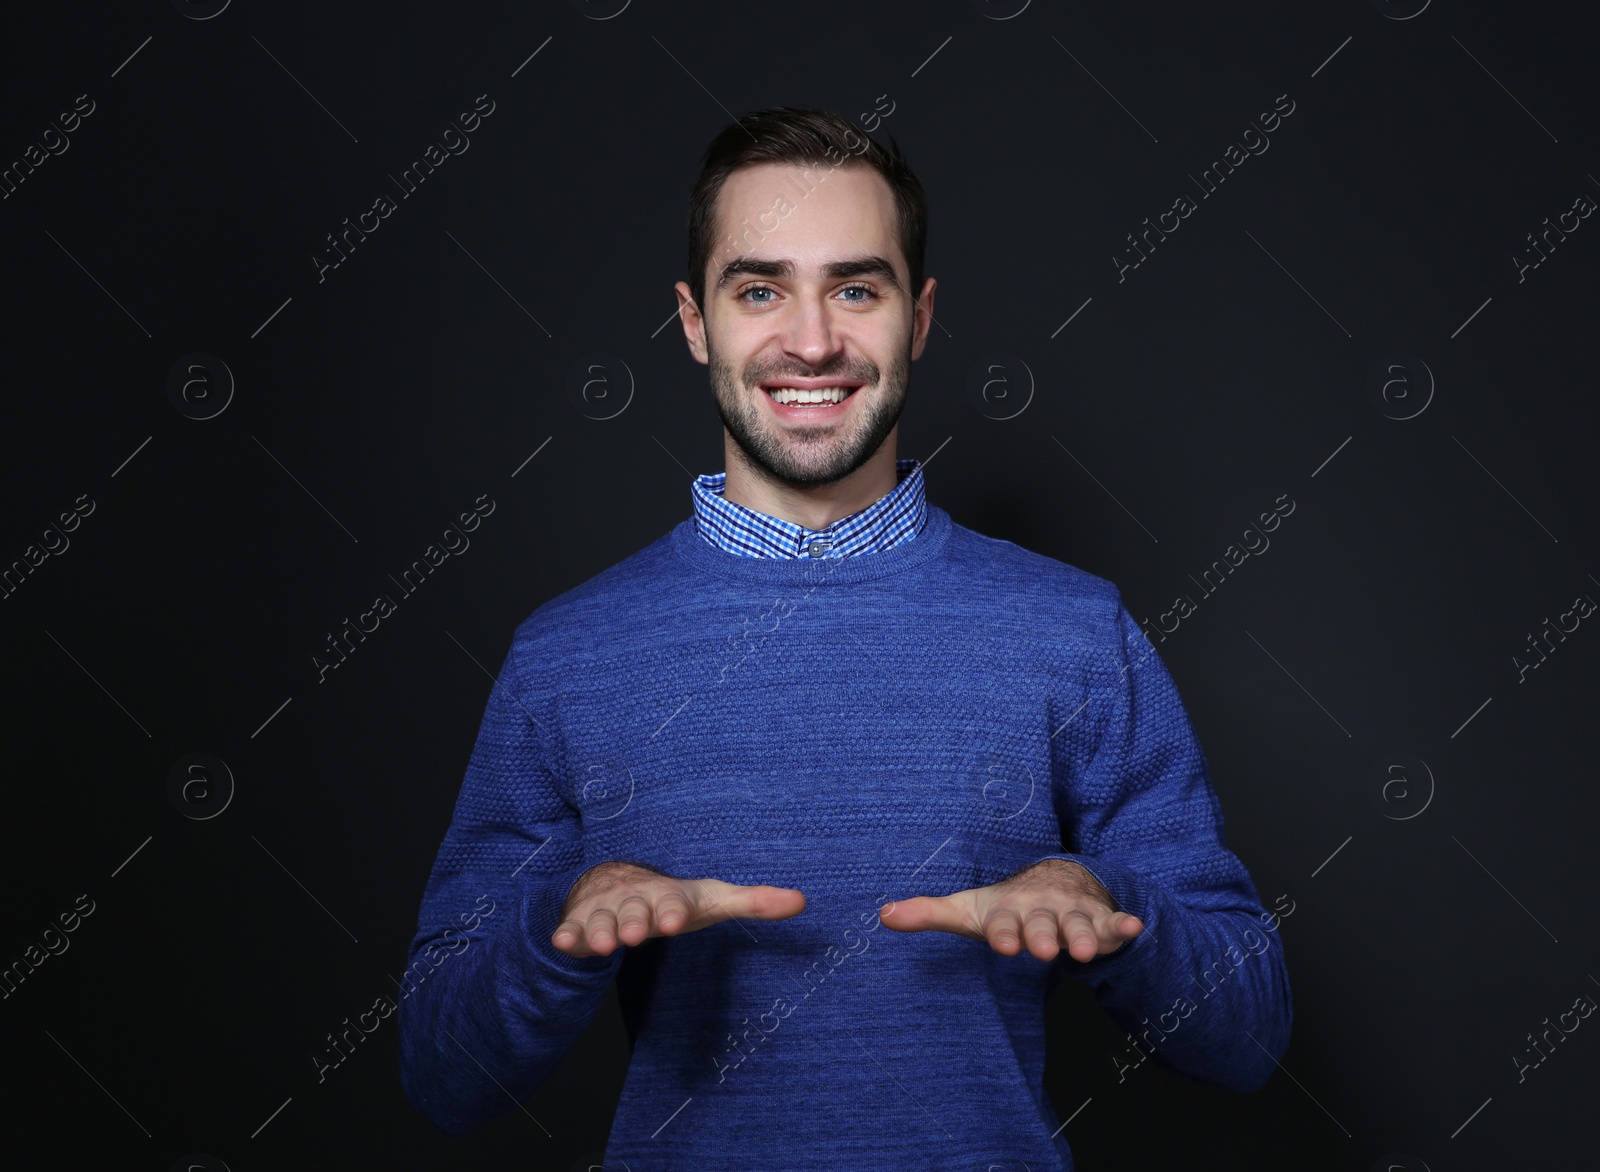 Photo of Man showing BLESS gesture in sign language on black background